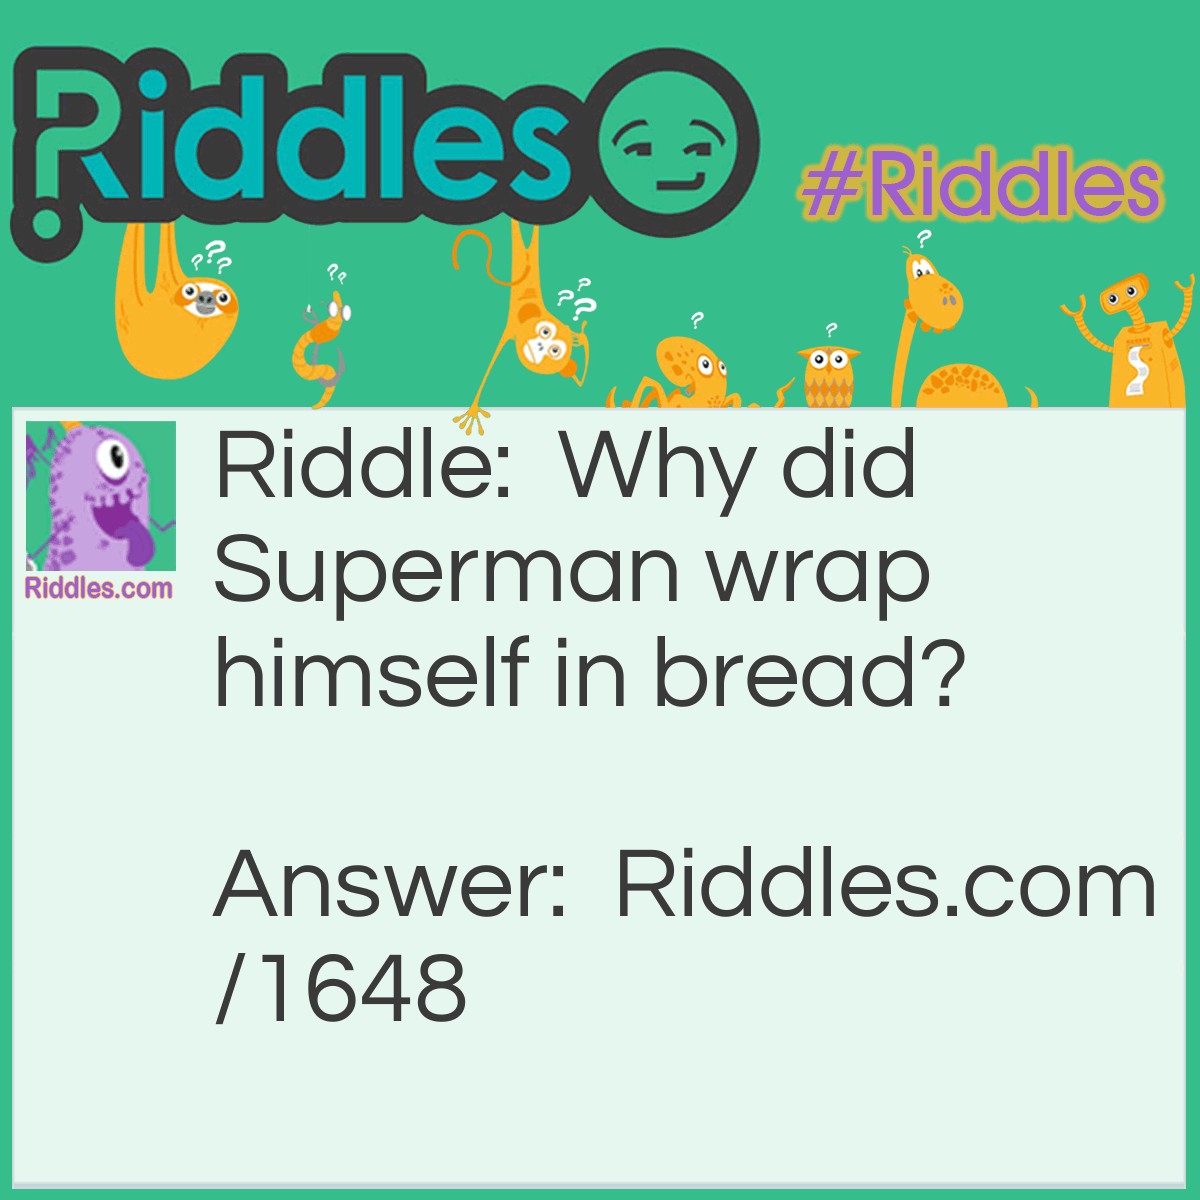 Riddle: Why did Superman wrap himself in bread? Answer: To make himself a hero sandwhich!